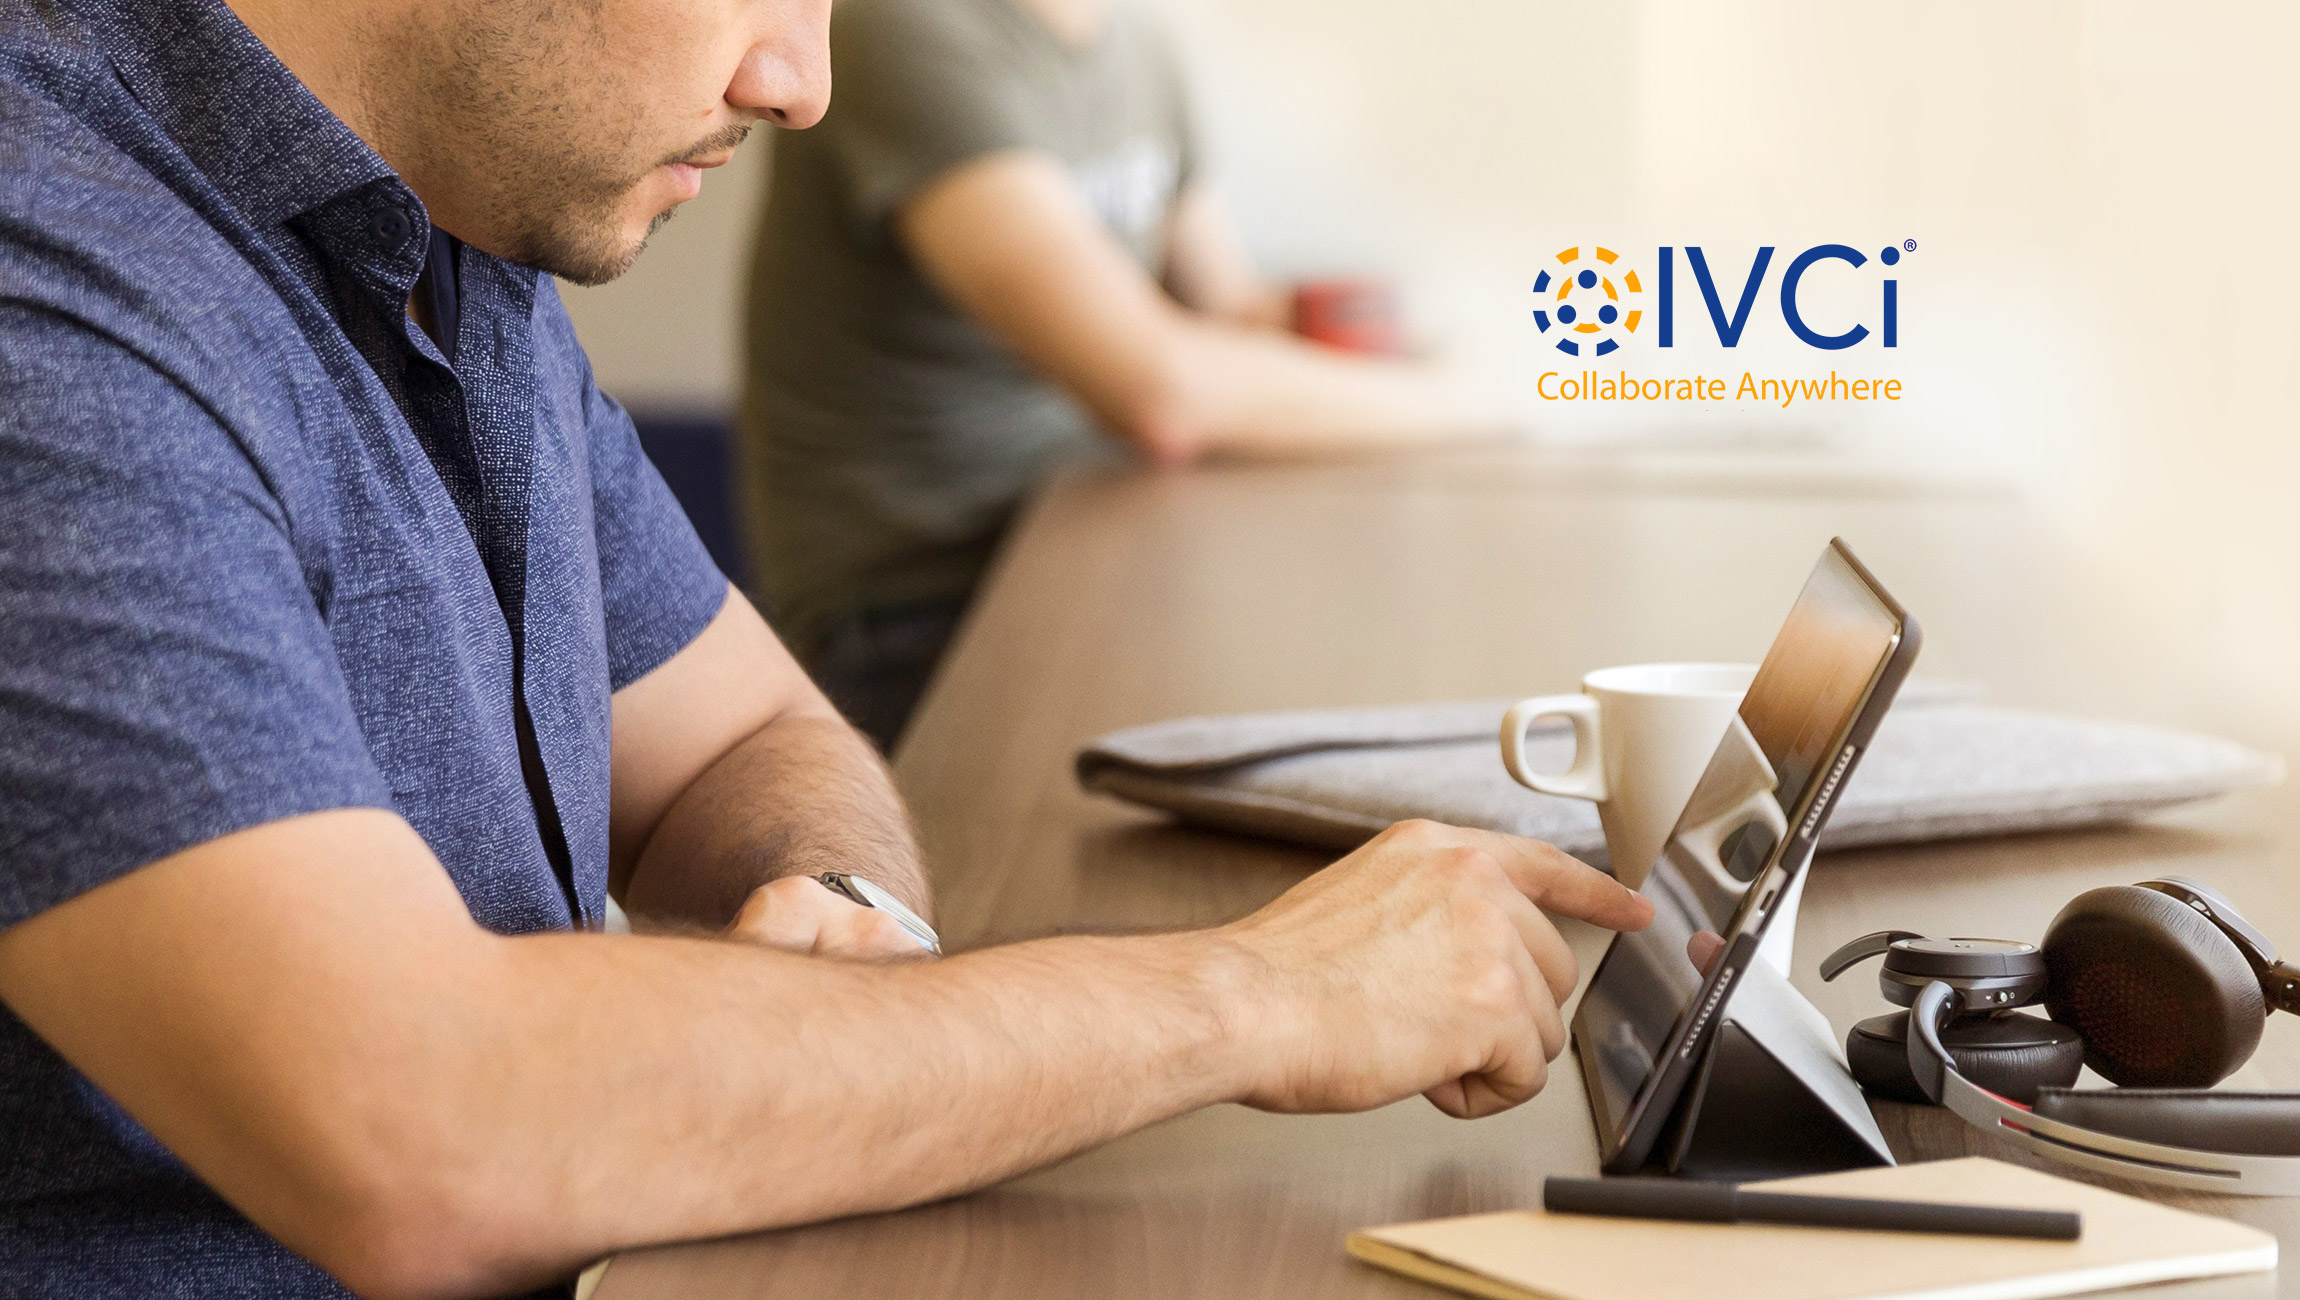 Video Conferencing Services Expert, IVCi, Lists Four Solutions To Enhance Your Huddle Room